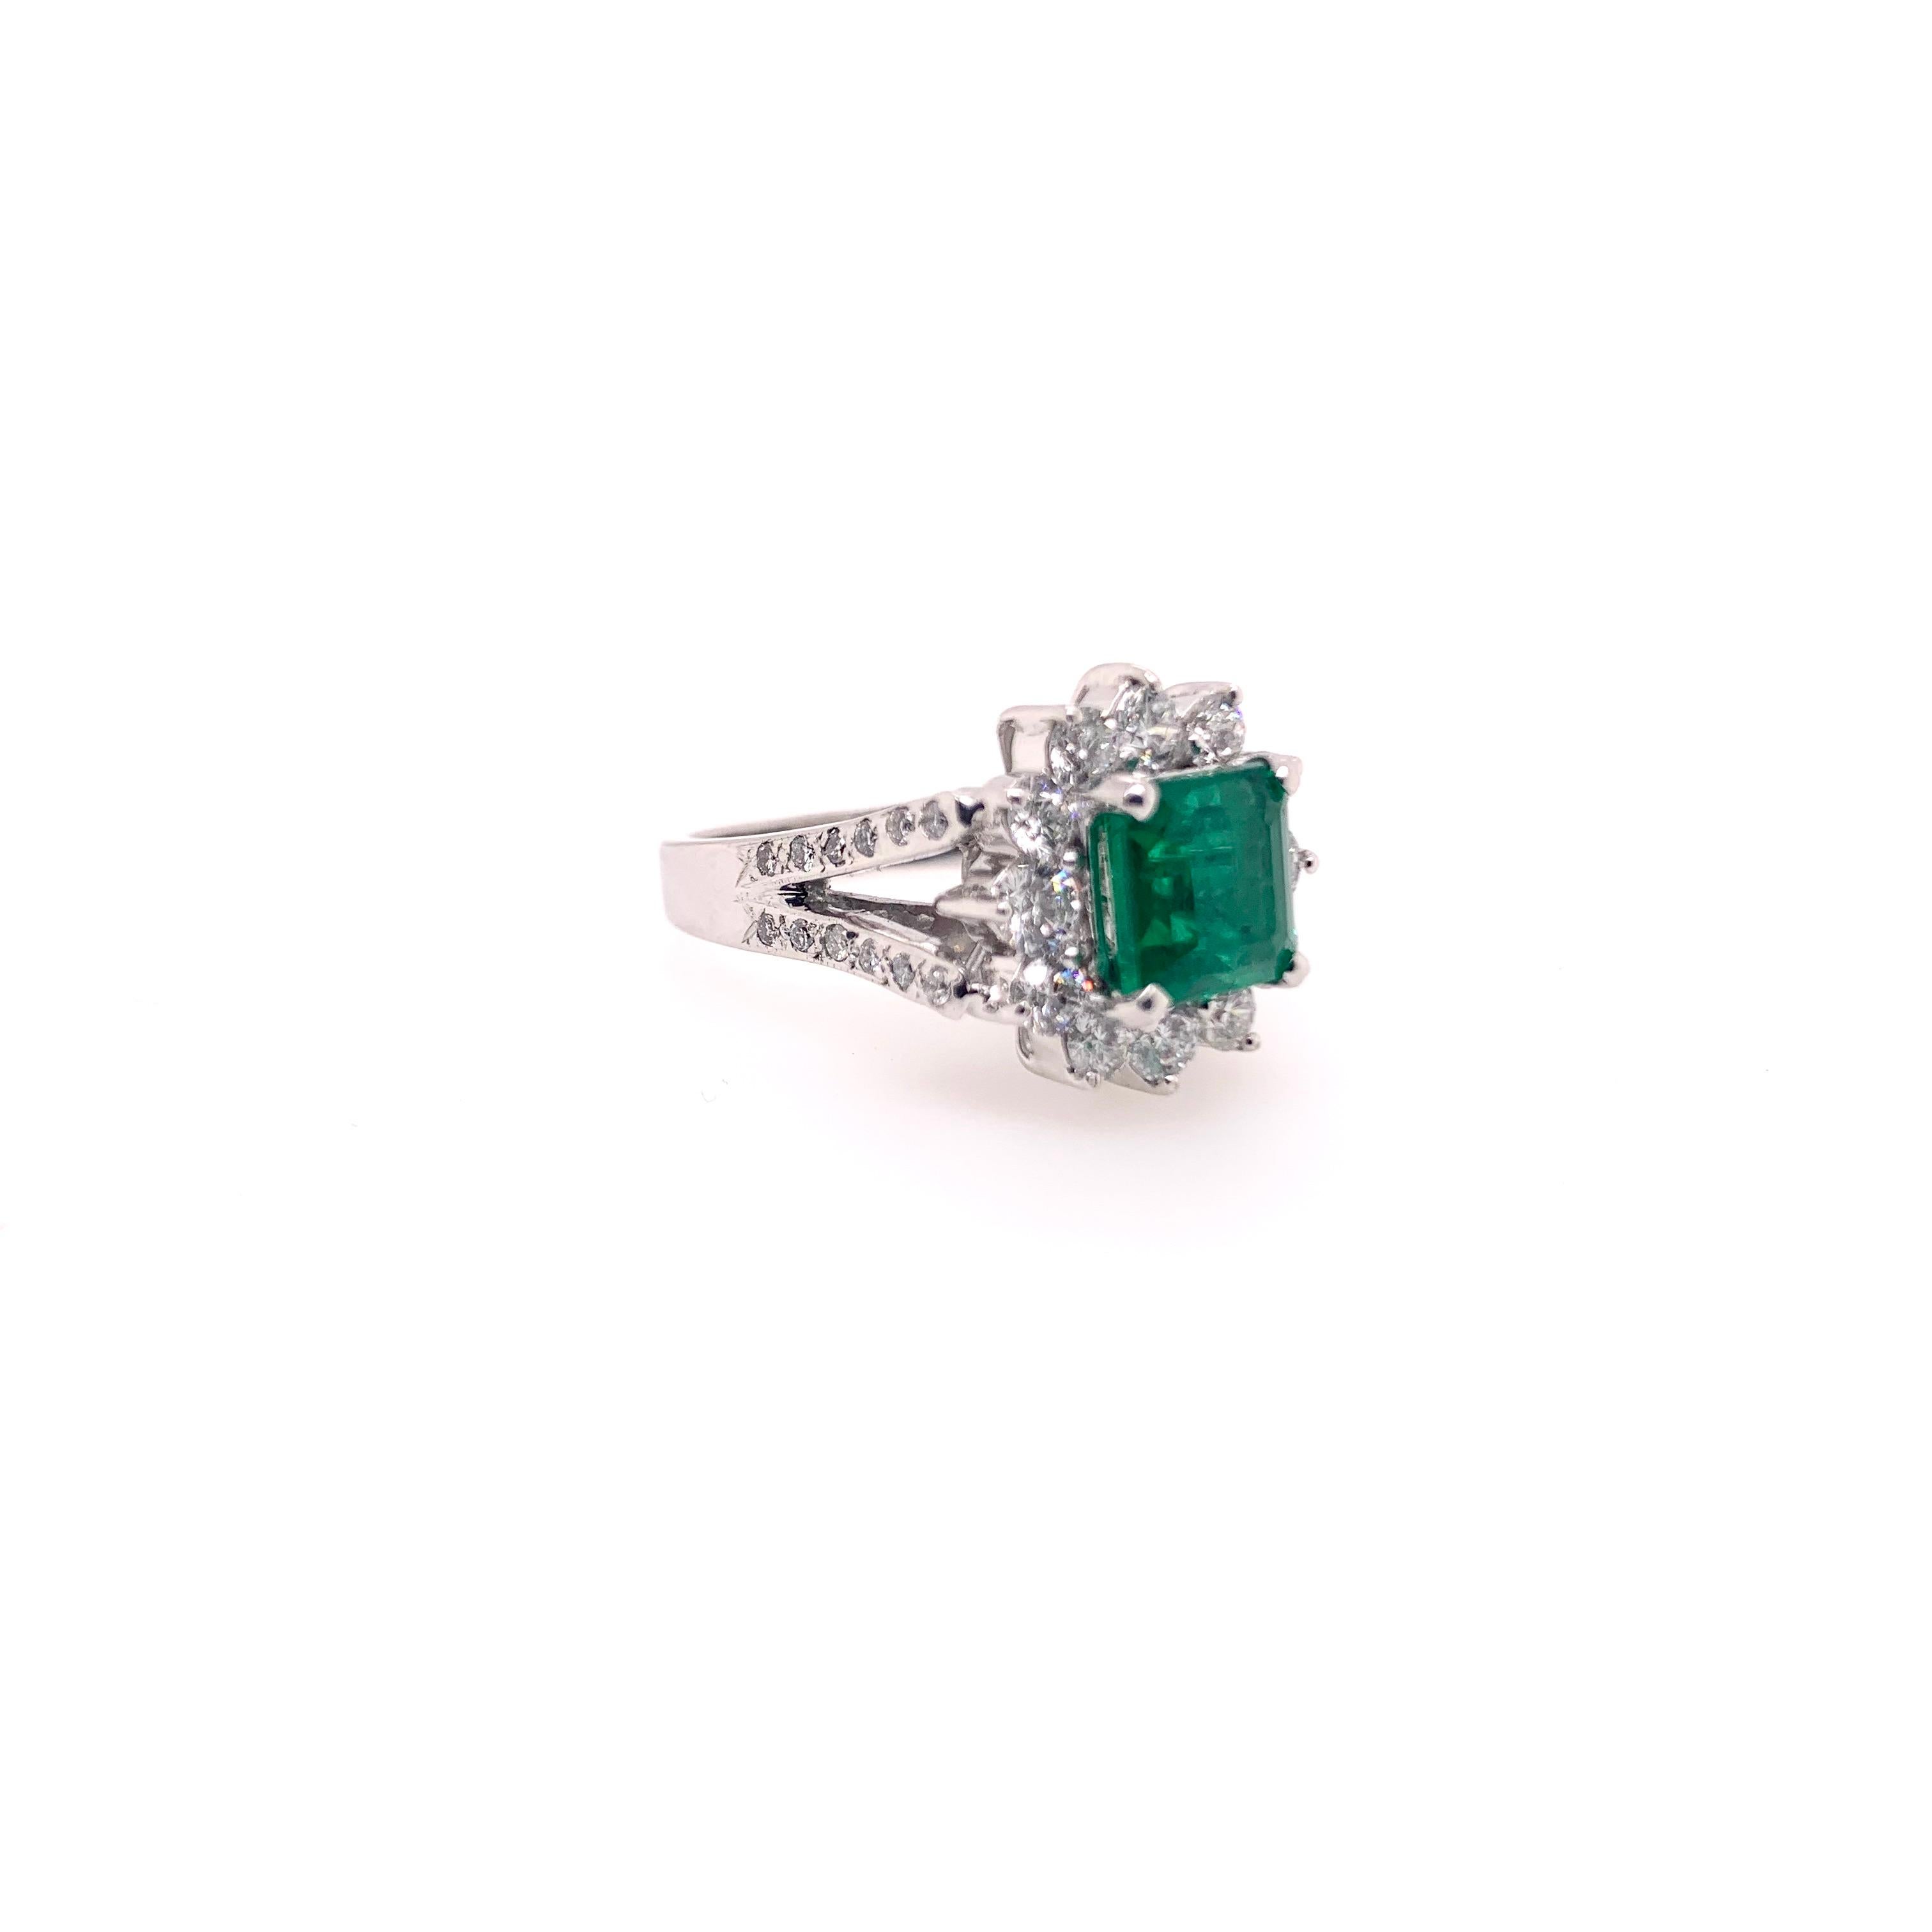 This stunning emerald ring is is a timeless design that will be in style for decades and generations.  The square cut emerald is surrounded by round brilliant diamonds which then leads to a V-shank with round brilliant diamonds.  The mounting is